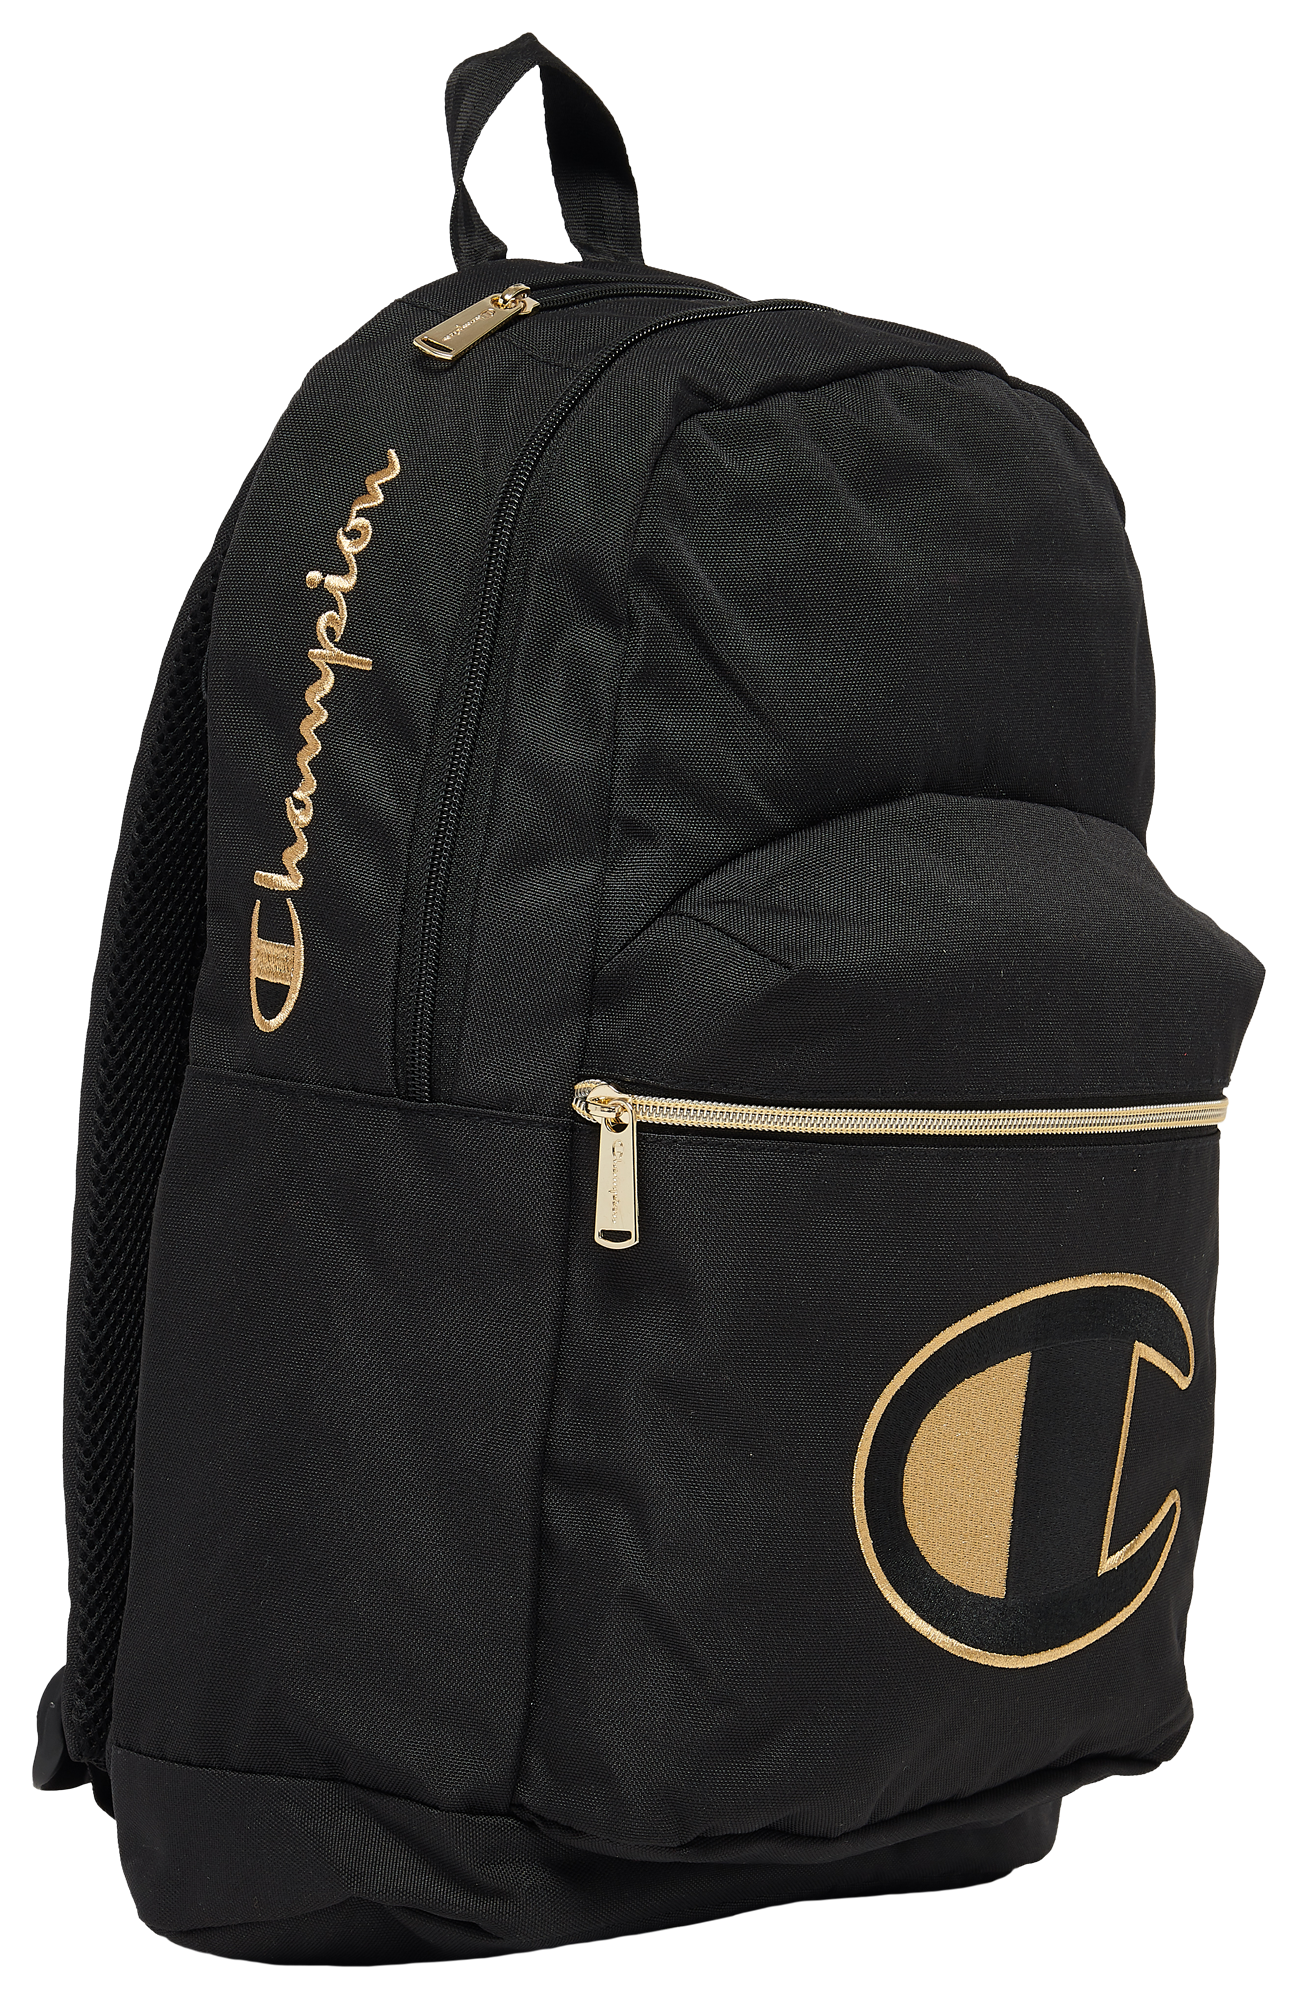 black and gold champion backpack